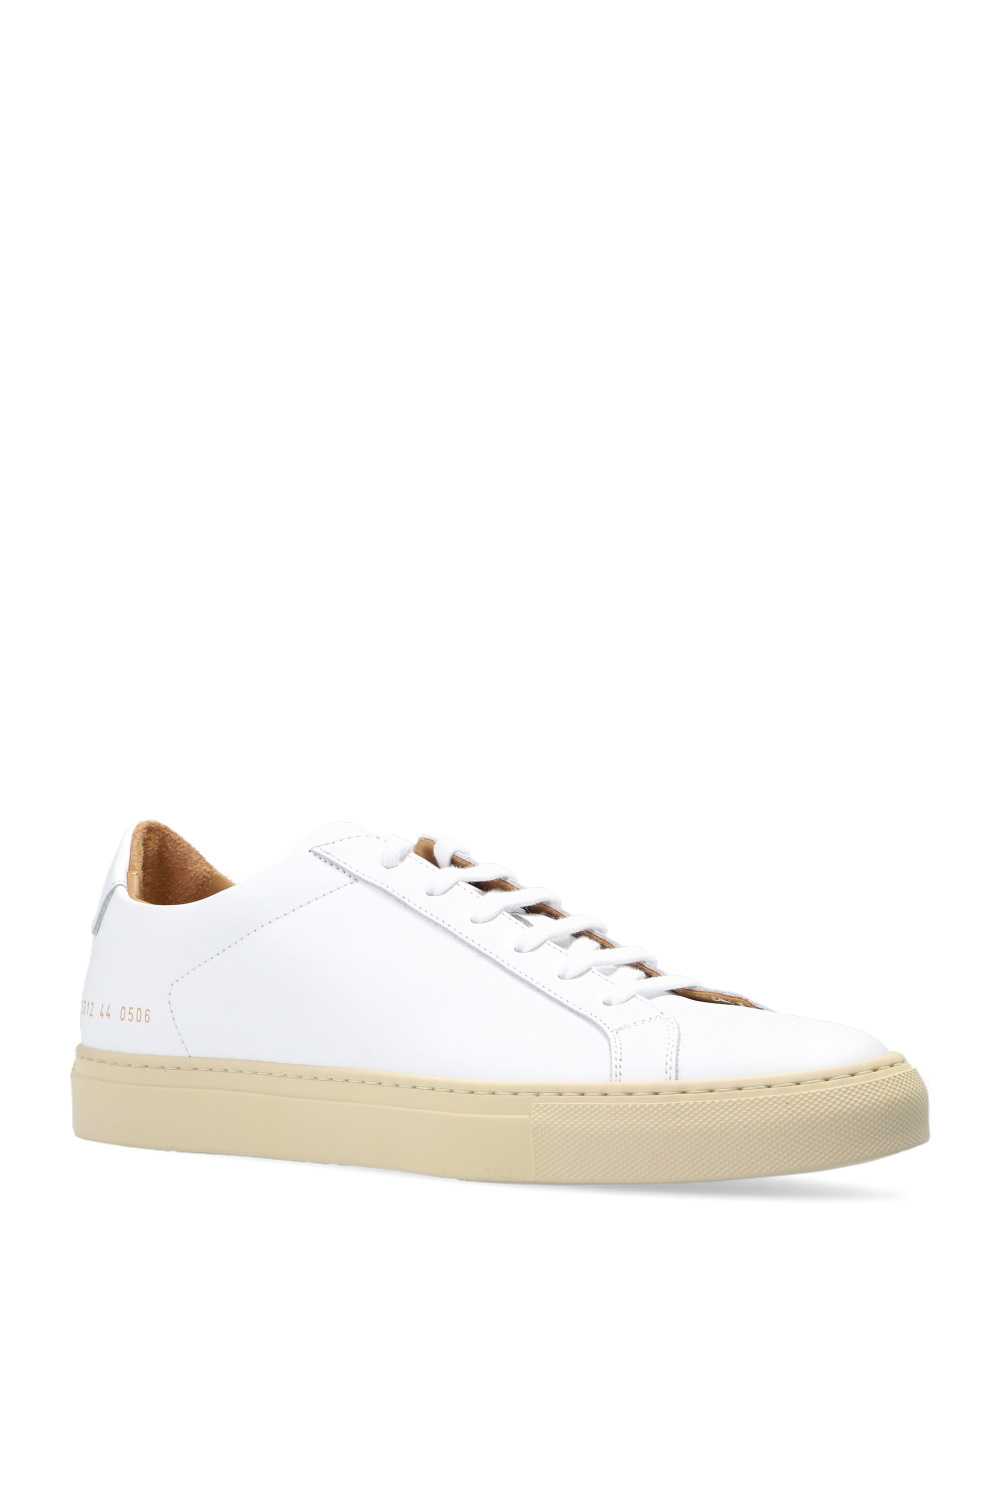 Common Projects ‘Retro Vintage’ sneakers